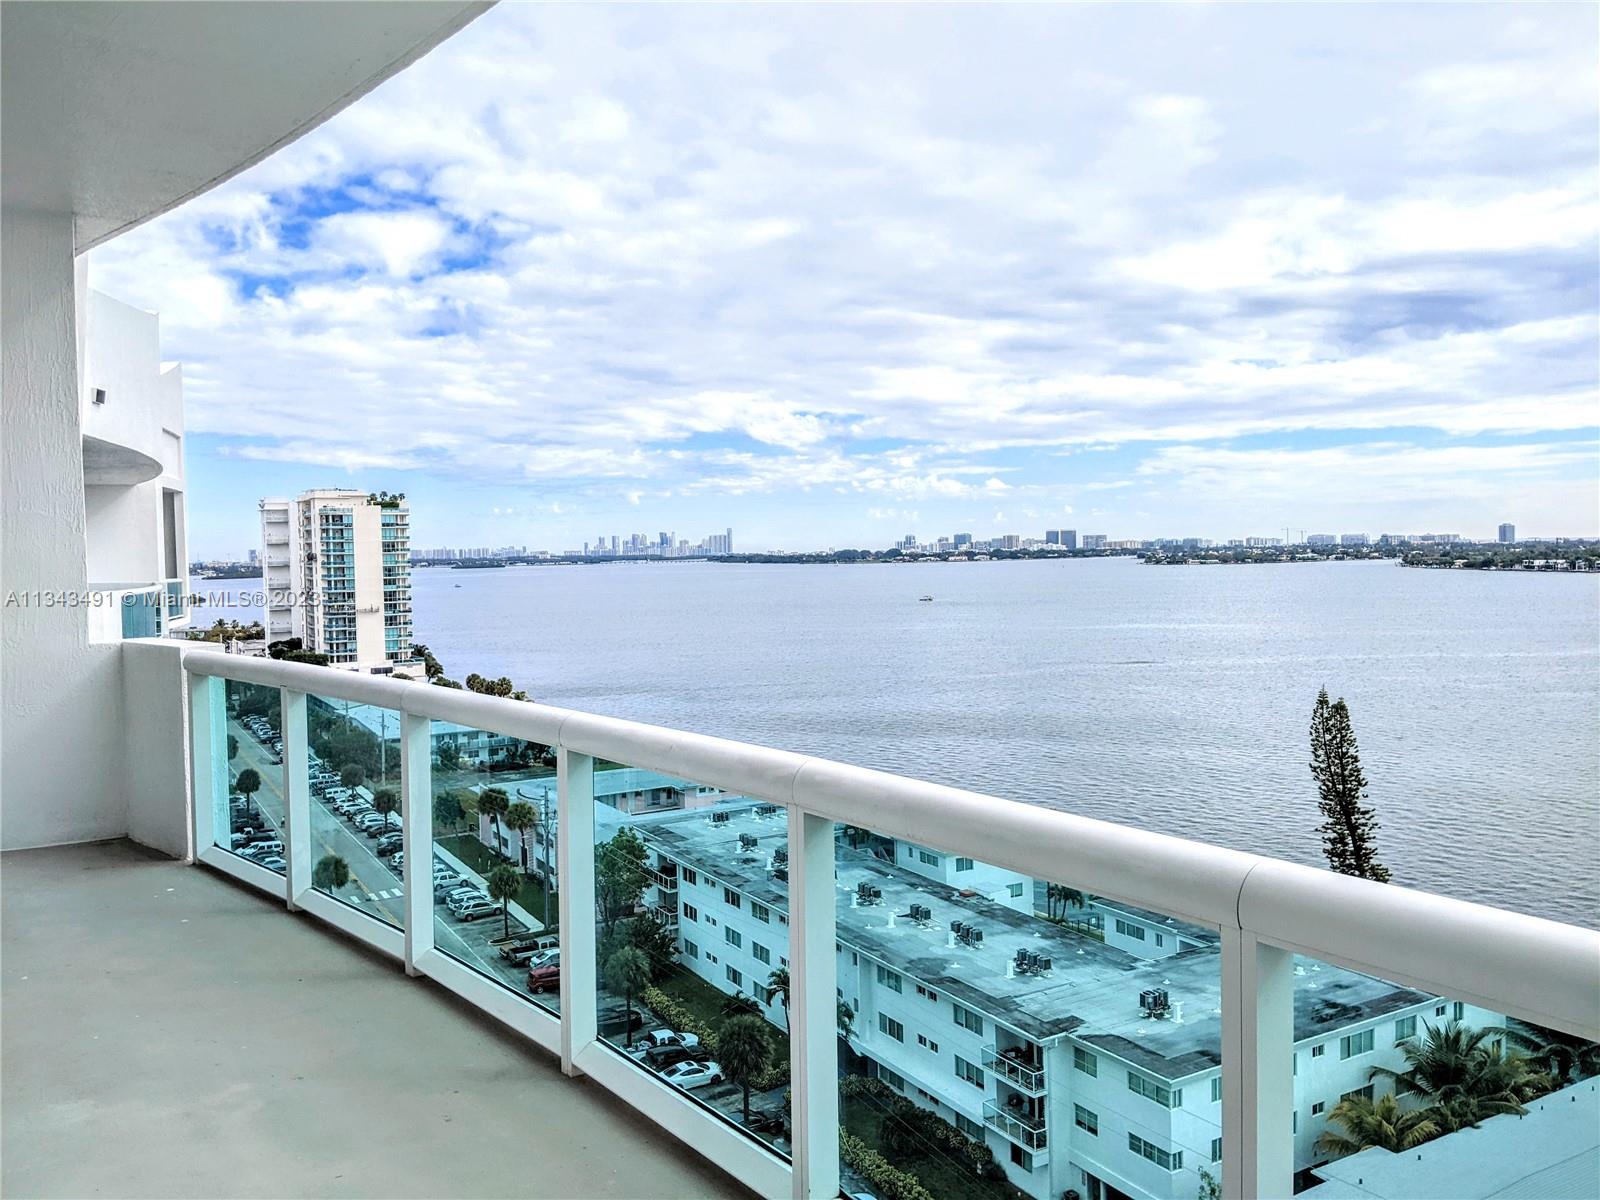 Amazing water views from this 2 bedroom, 2 bath unfurnished unit located in North Bay Village. Walk into an open living space, split floorplan, access the large balcony from living room and master, washer and dryer in unit, impact glass windows with blinds. Master features large walk-in closet, double vanity, large jet tub and shower. Amenities include two resort-style pools, first class gym, valet, and guard gated. Unit comes with 1 parking space. Move in costs: first month, last month, security deposit to landlord and security & elevator deposit to building.